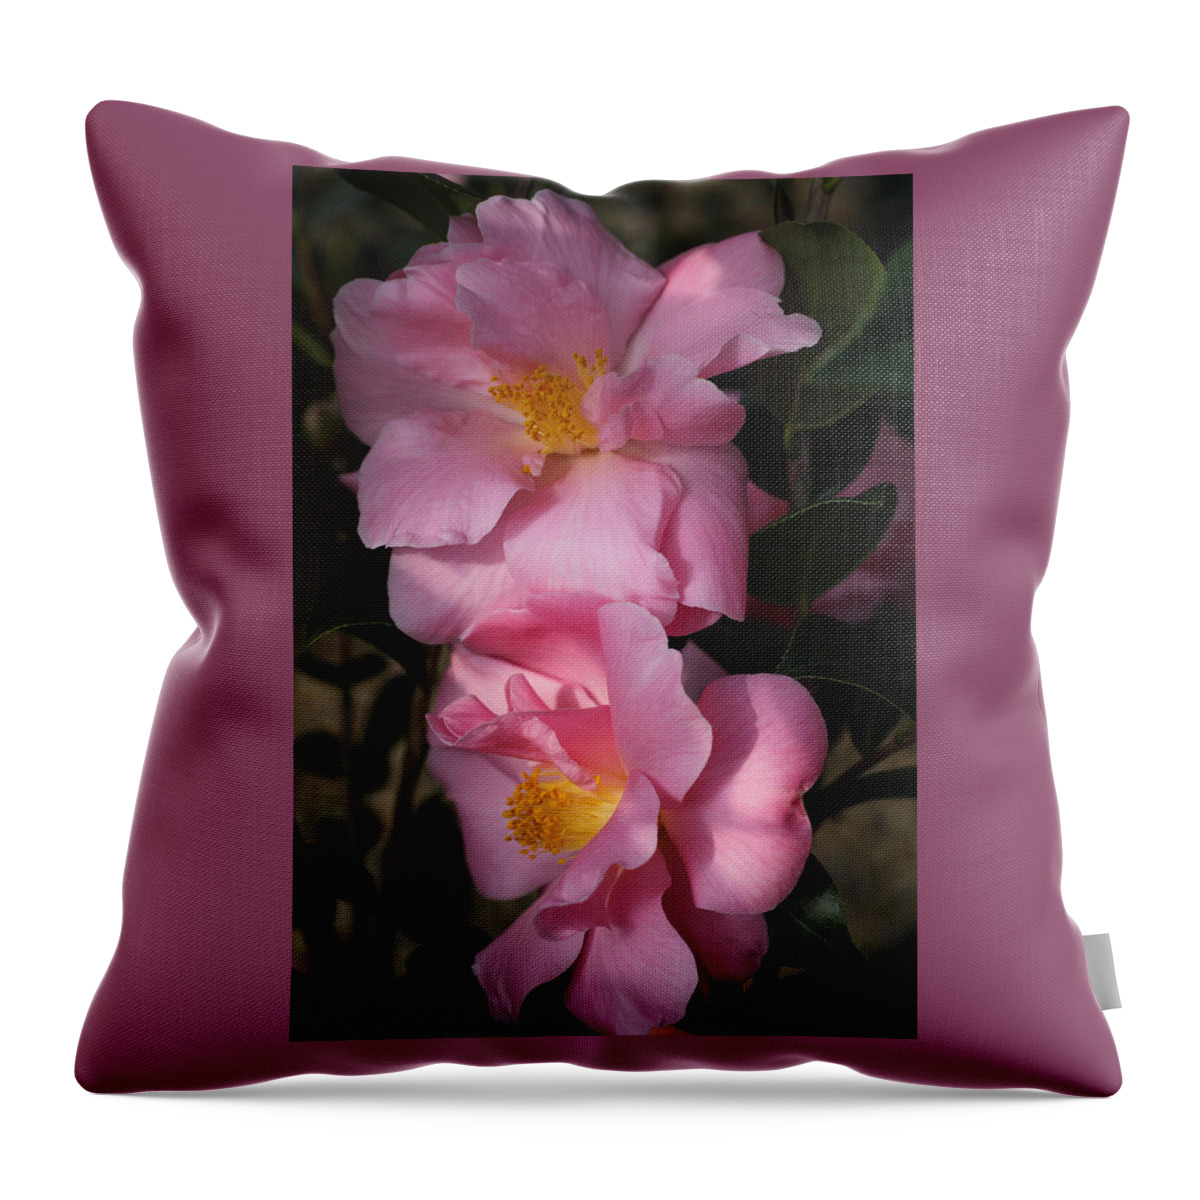 Flowers Throw Pillow featuring the photograph Pink Parfait by Tammy Pool